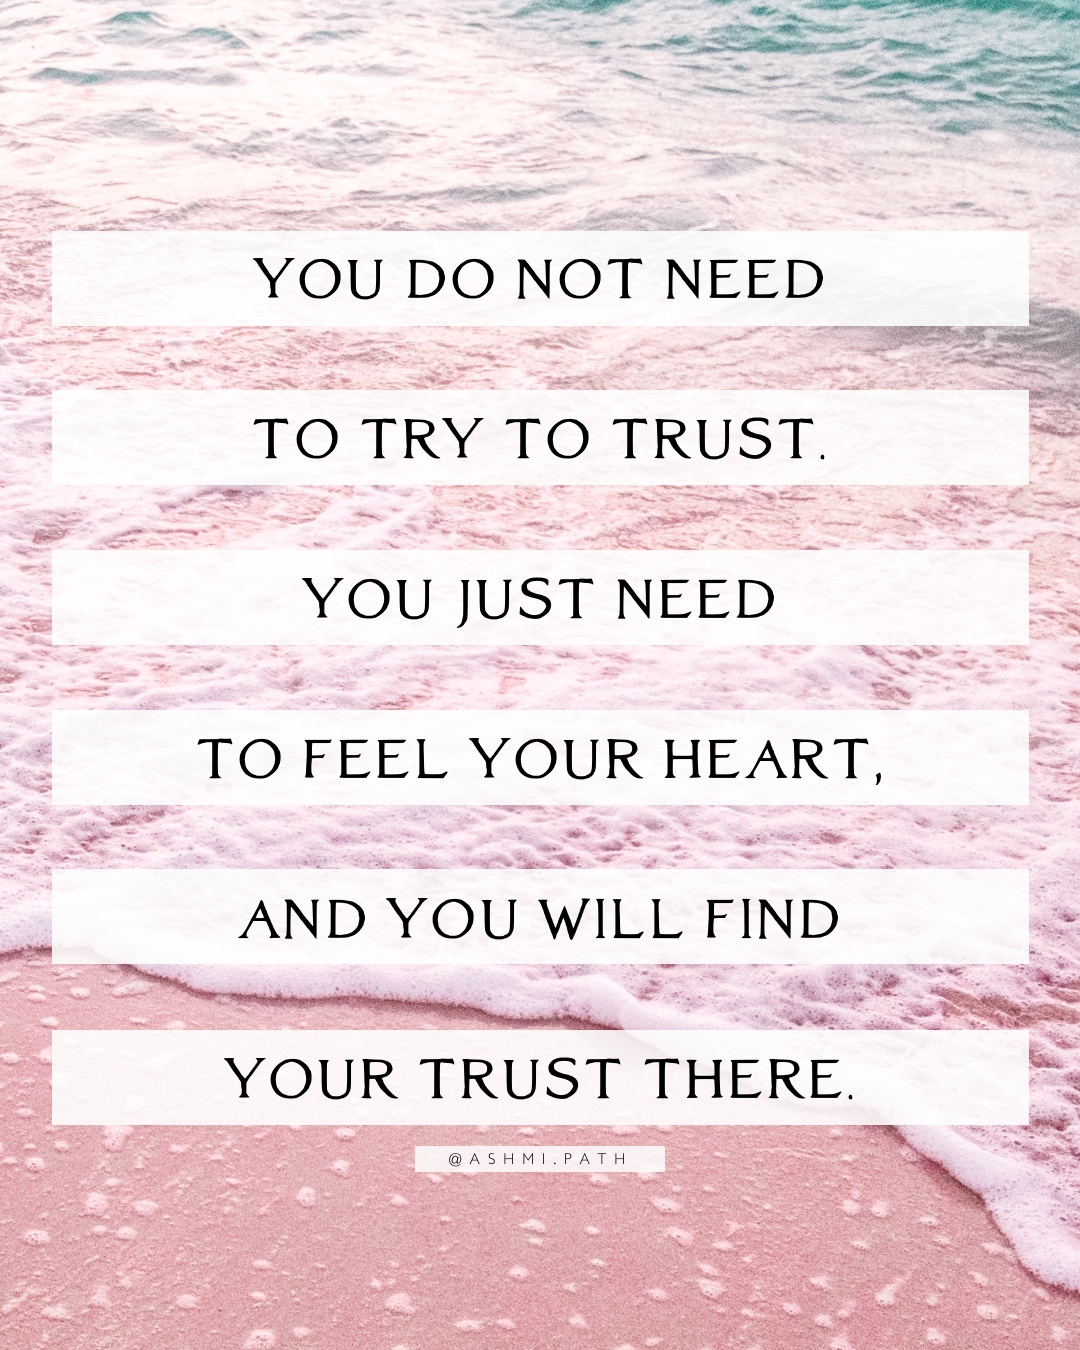 Why It's Hard to Try to Trust